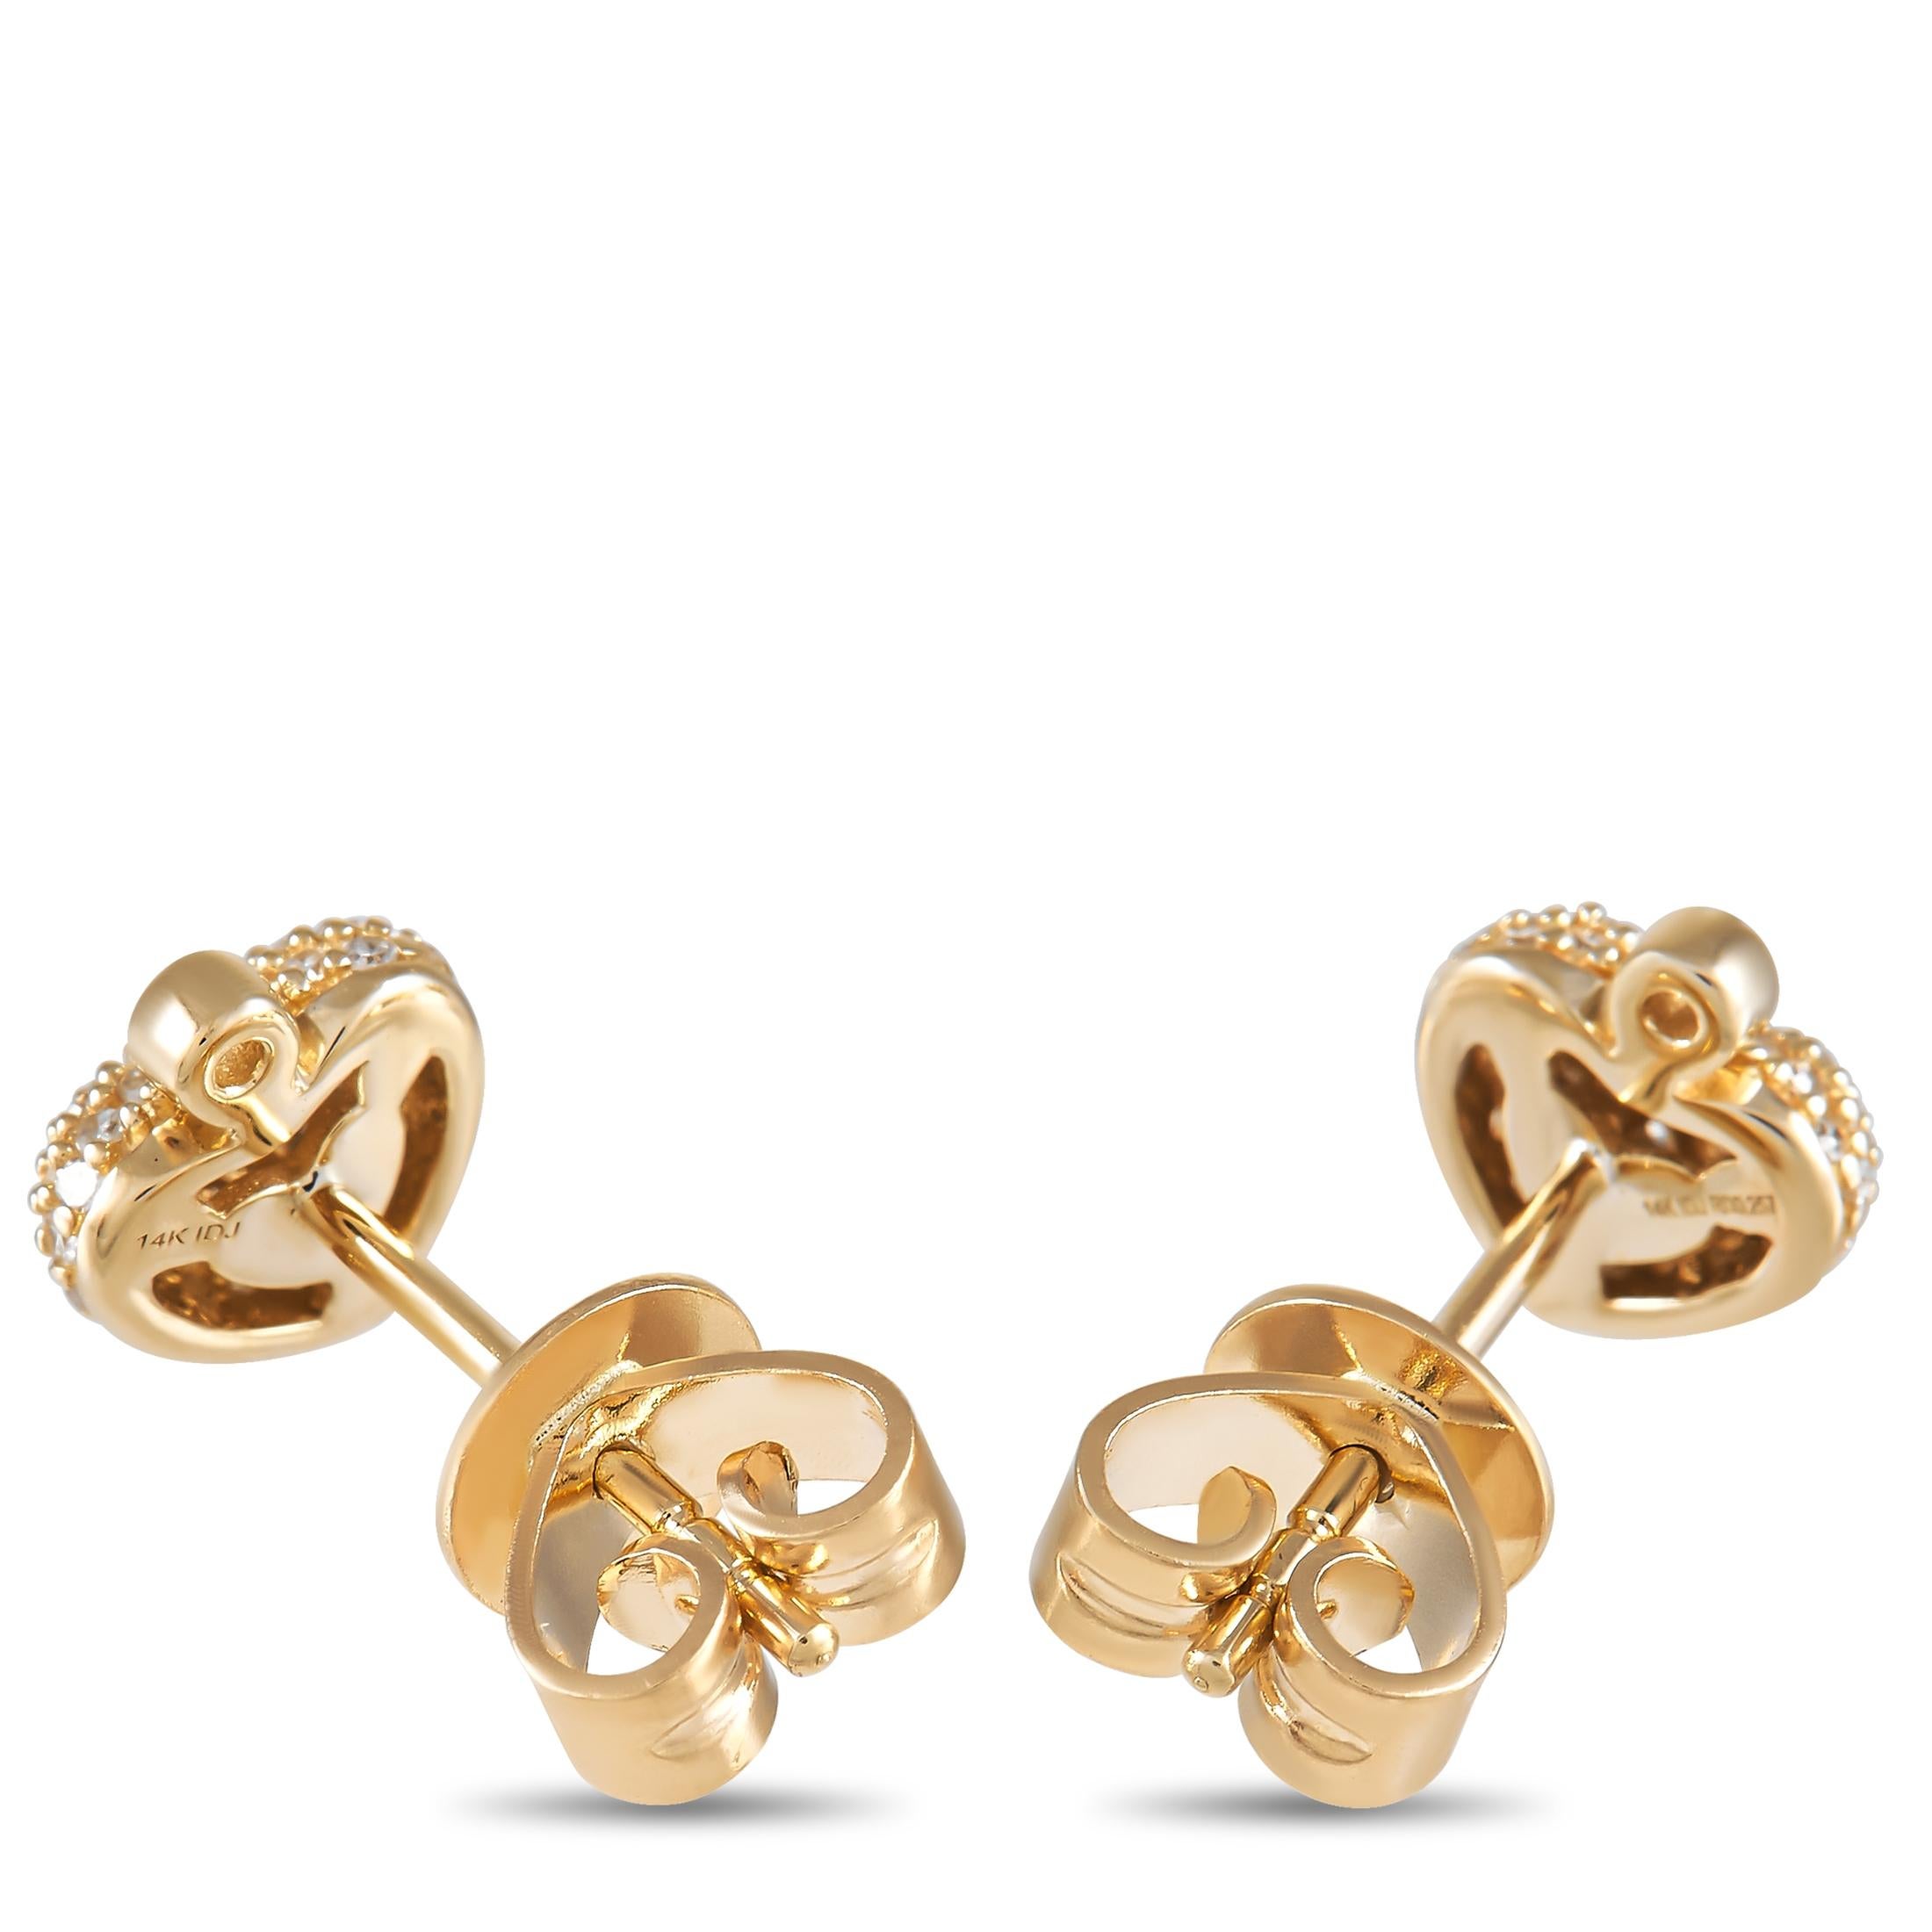 These sweet LB Exclusive earrings are sure to brighten up your day! The earrings are made from 14K yellow gold, shaped into a heart, and set with round-cut diamonds over the face of each earring, for a total of 0.25 carats of diamonds over the pair.